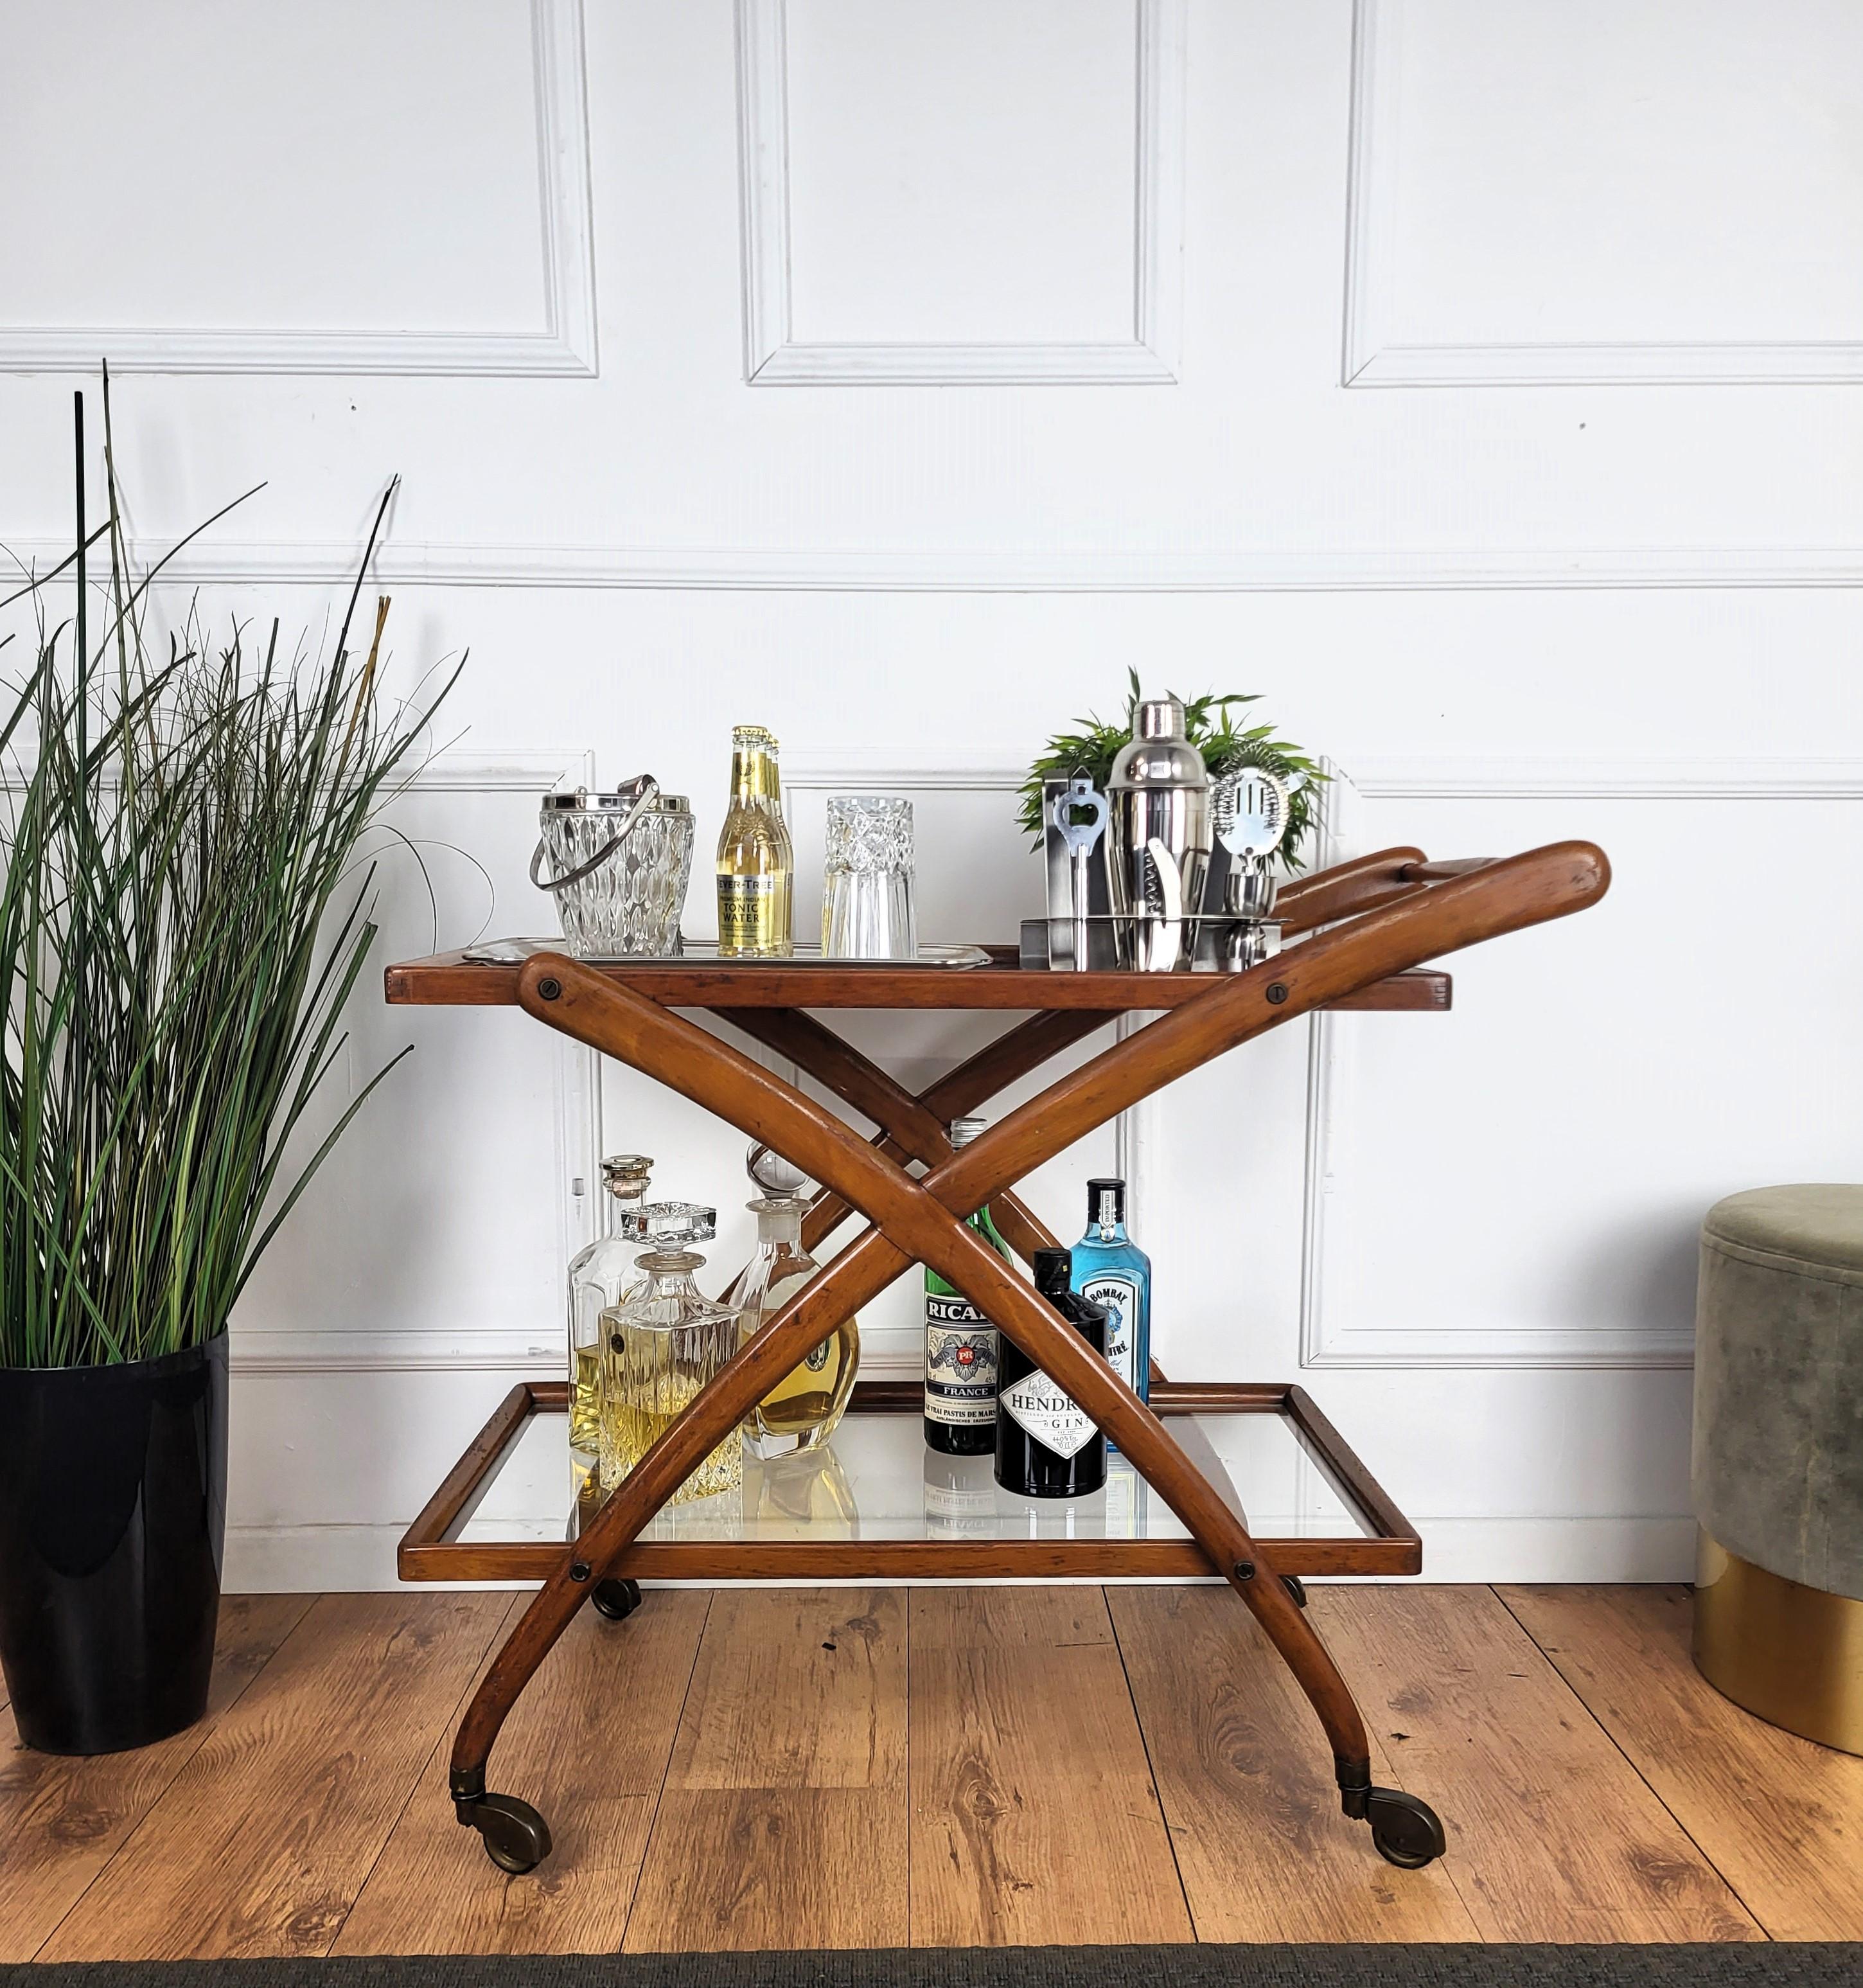 Unique and very elegant Italian Art Deco MidCentury Modern dry bar cabinet cart with two glass tiers and highlighted by the great wooden structure design and overall shape completed by the details of the original antique brass wheels. 

The Art Deco